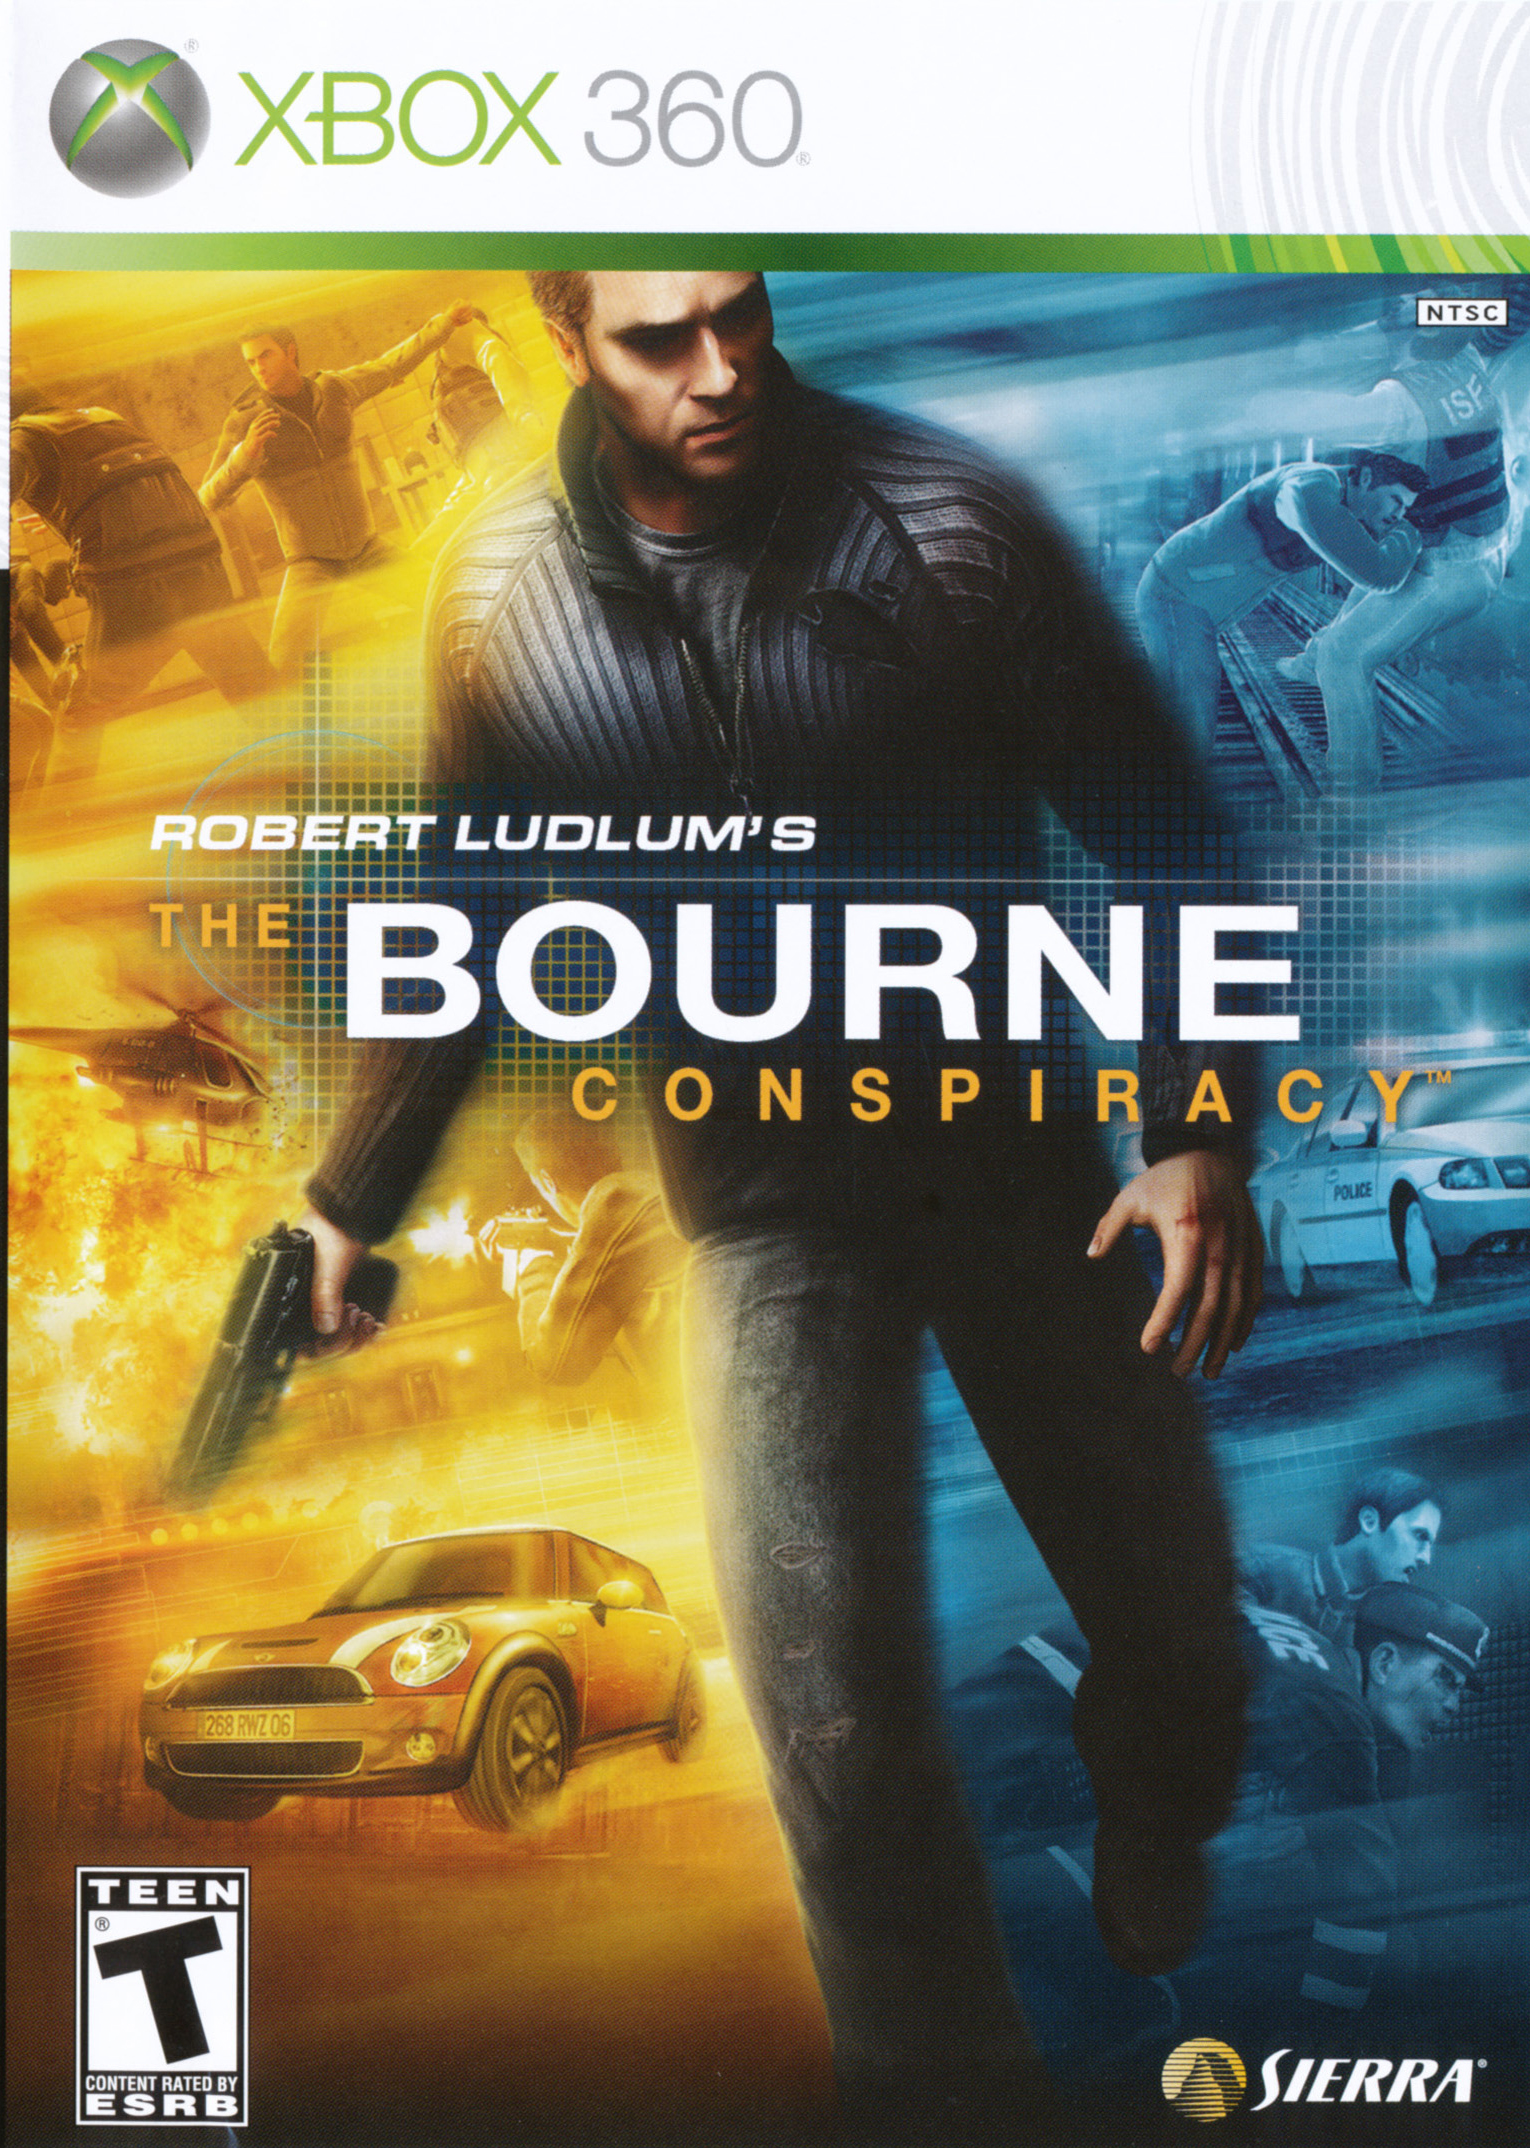 Robert Ludlum's The Bourne Conspiracy Picture